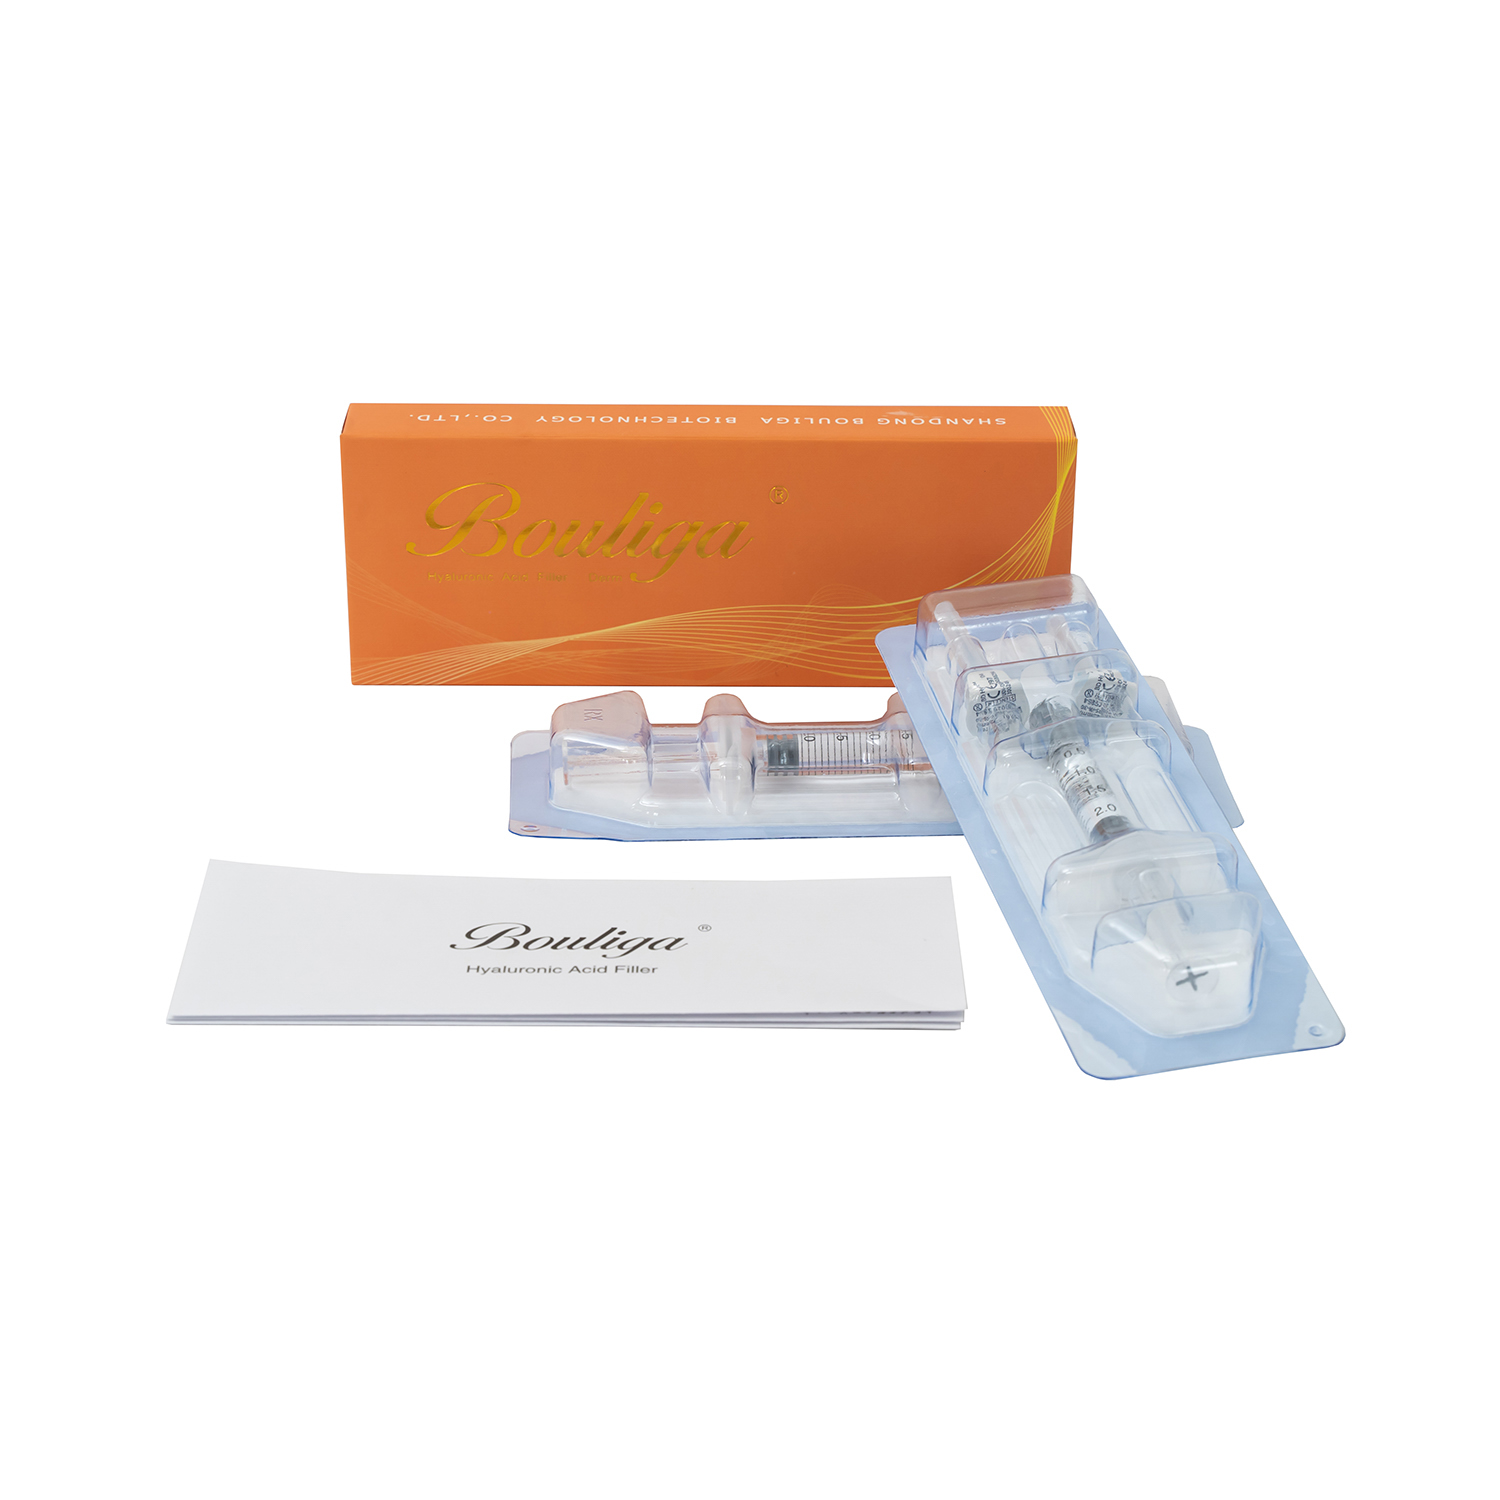 High-Quality Hyaluronic Acid Filler Injection for Superficial or Deep Wrinkles